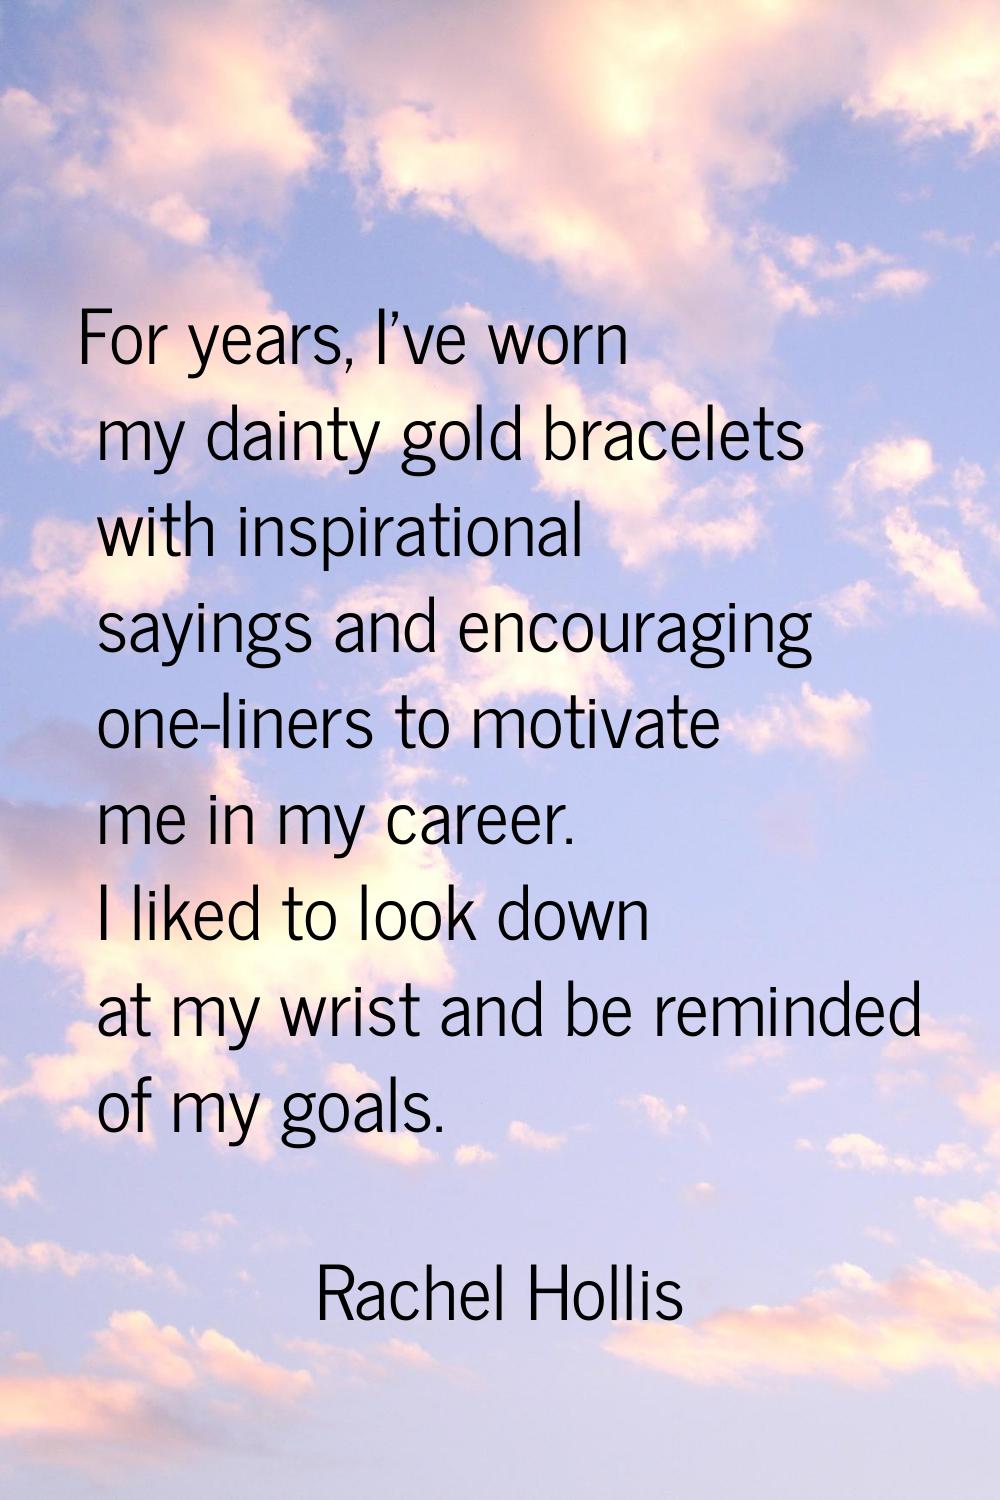 For years, I've worn my dainty gold bracelets with inspirational sayings and encouraging one-liners